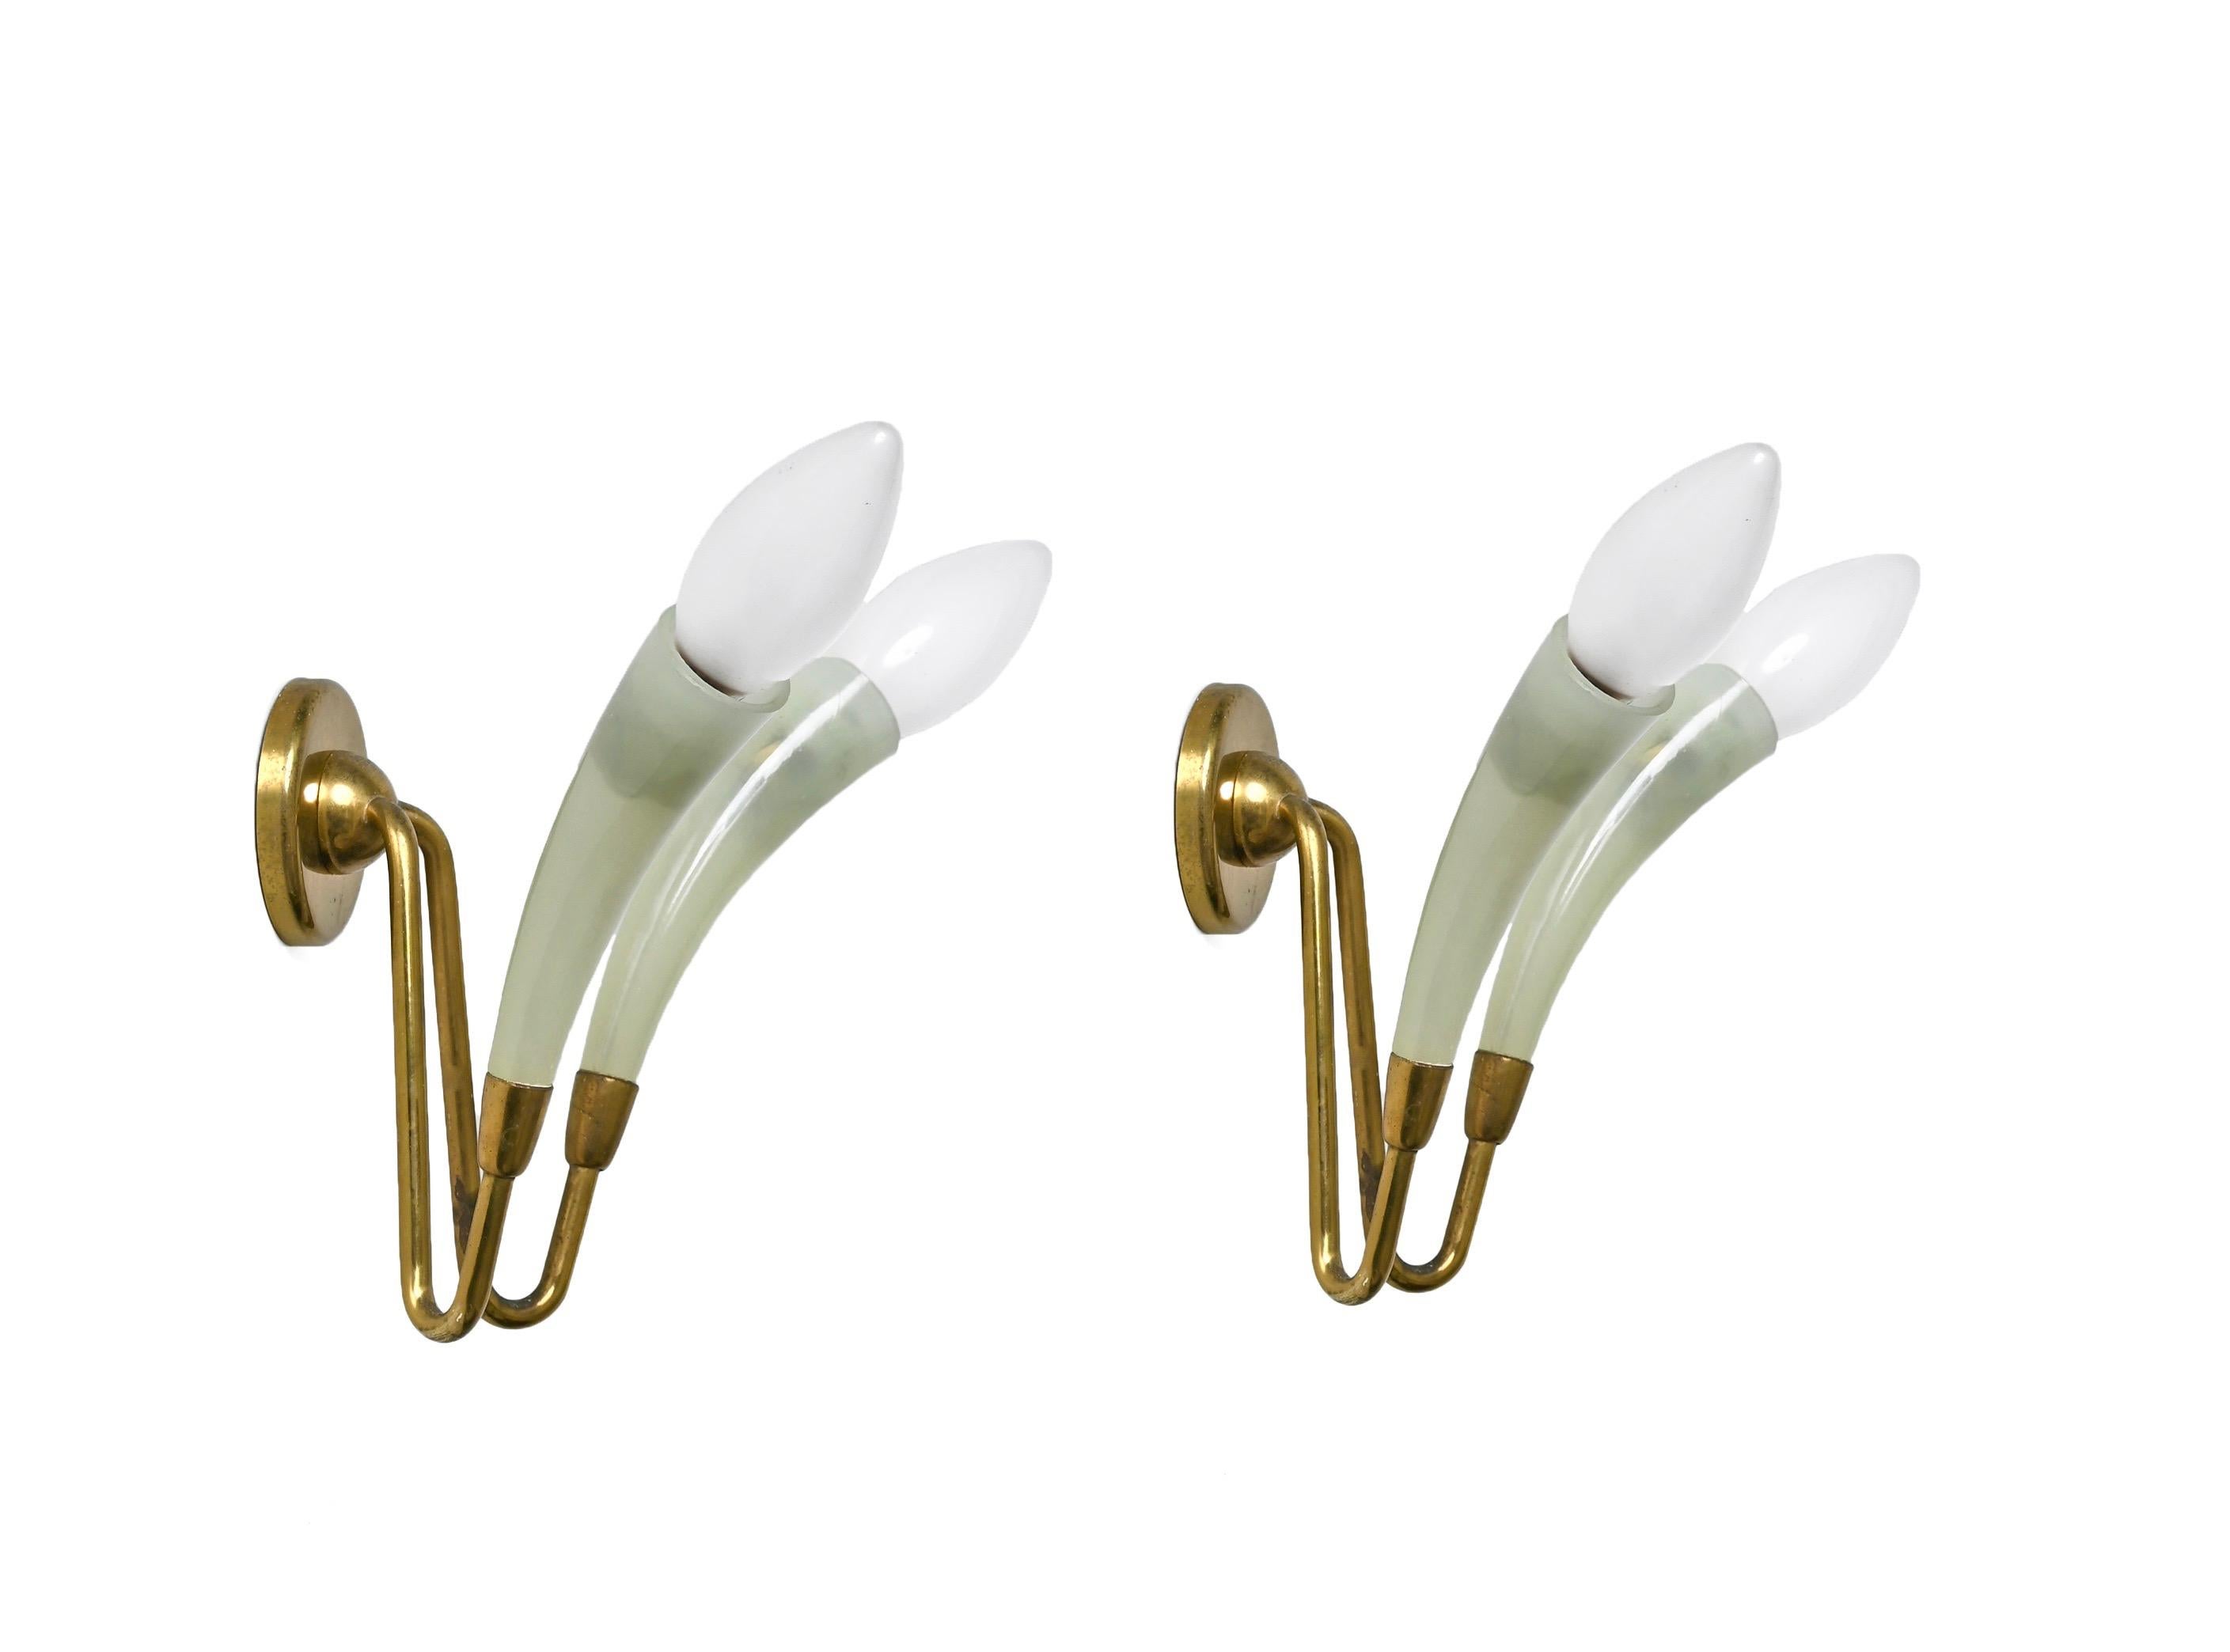 Mid-20th Century Pair of Italian Sconces in Green Murano Glass and Brass, Guglielmo UIrich 1940s For Sale